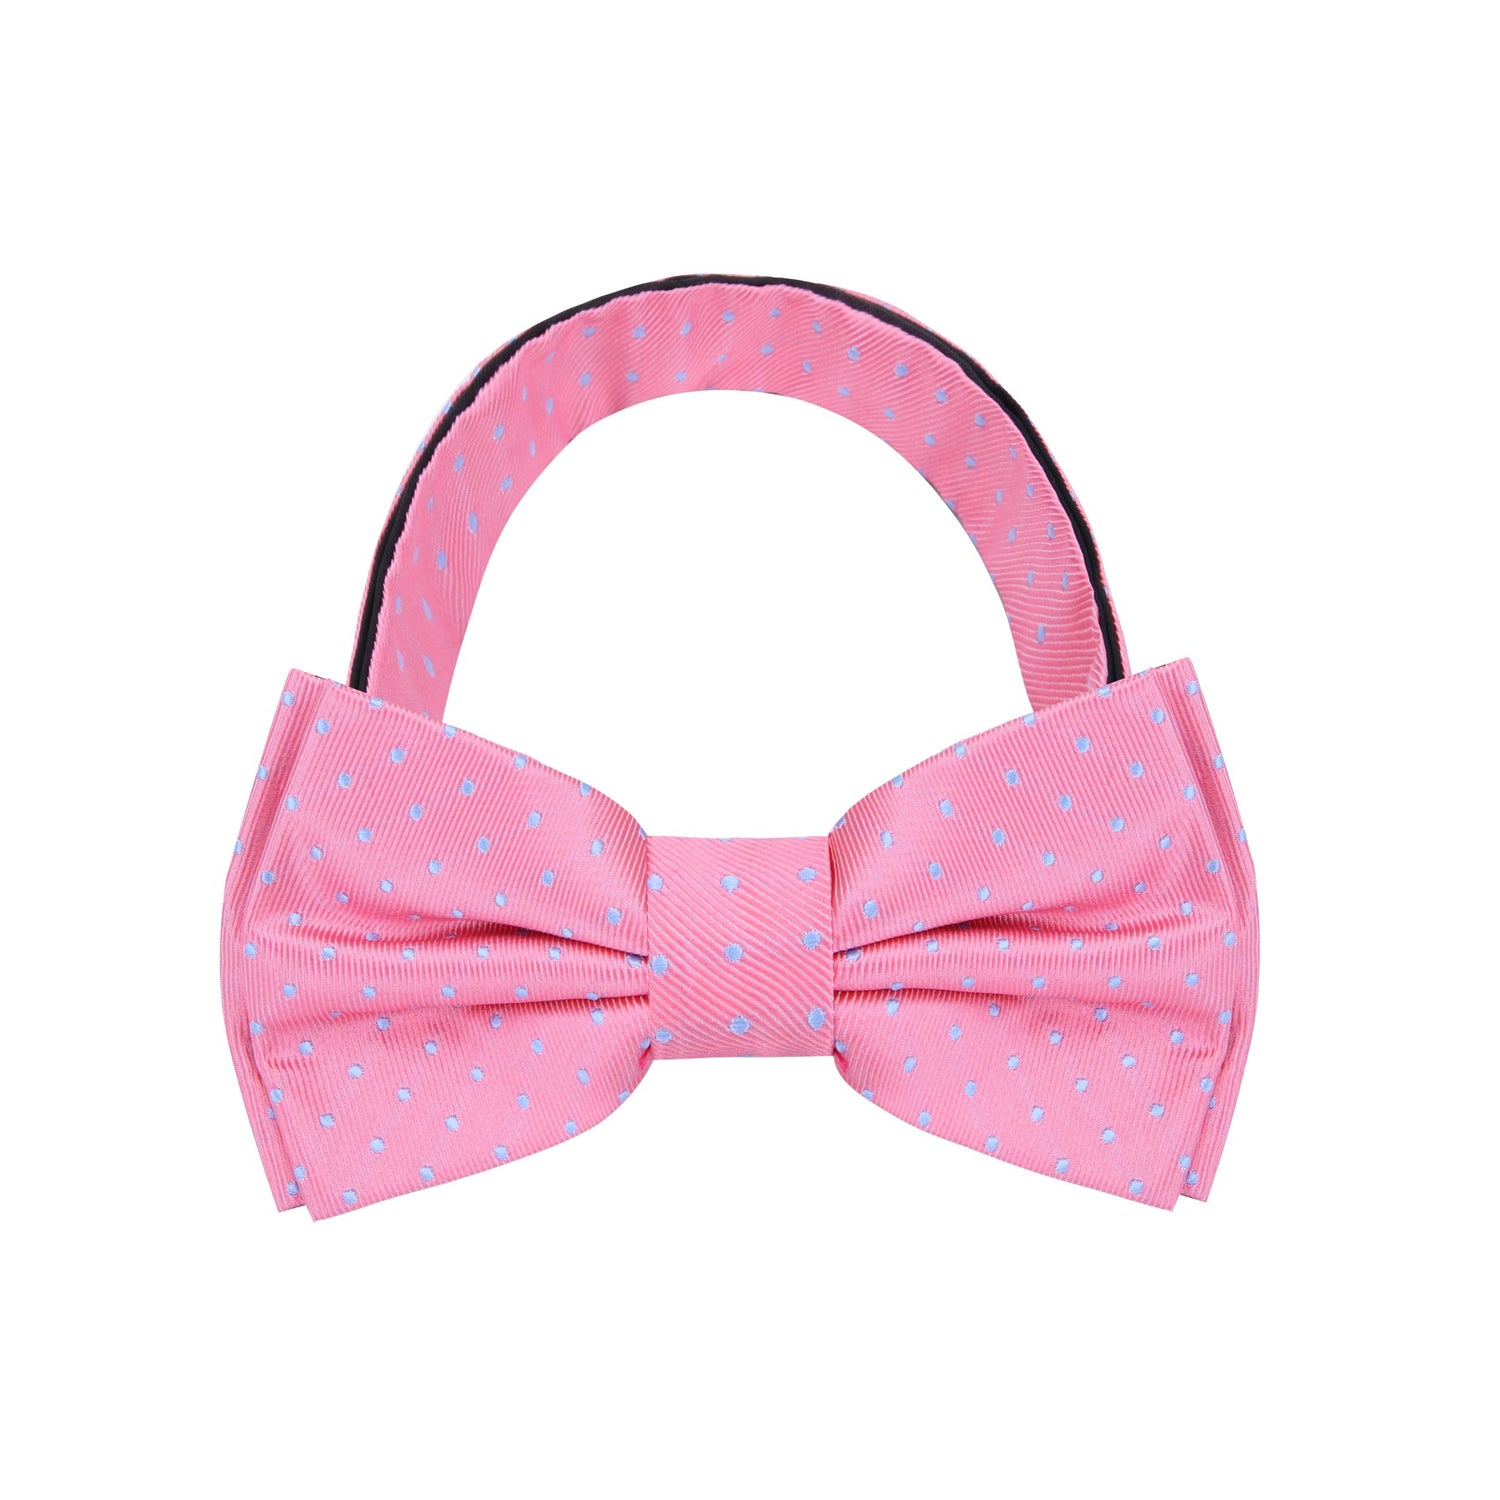 Gumball Pink, Rich Light Blue Polka Dots Bow Tie Pre Tied